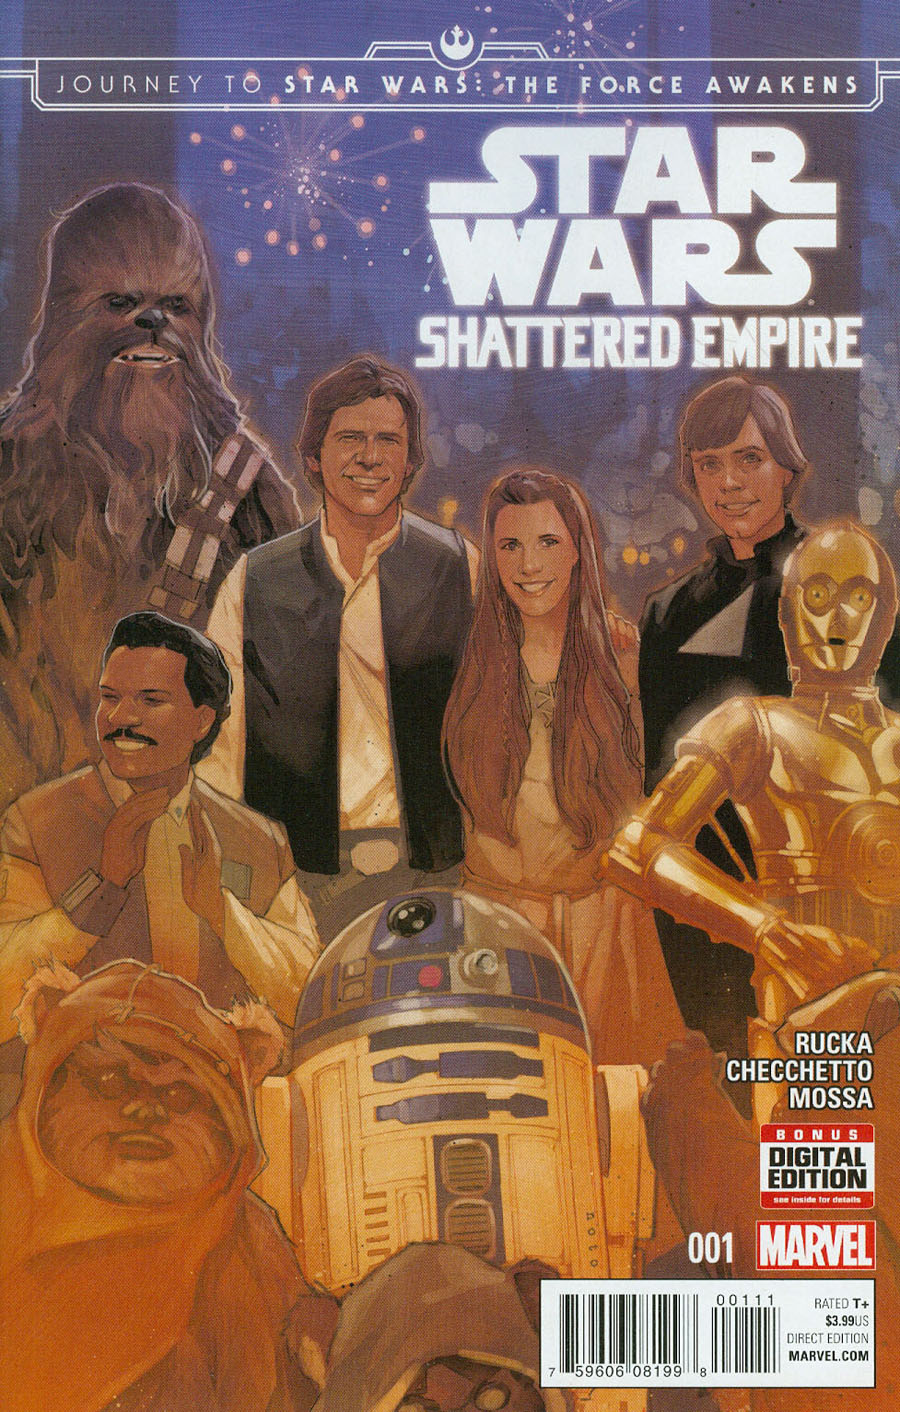 Journey To Star Wars Force Awakens Shattered Empire #1 Cover A Regular Phil Noto Cover